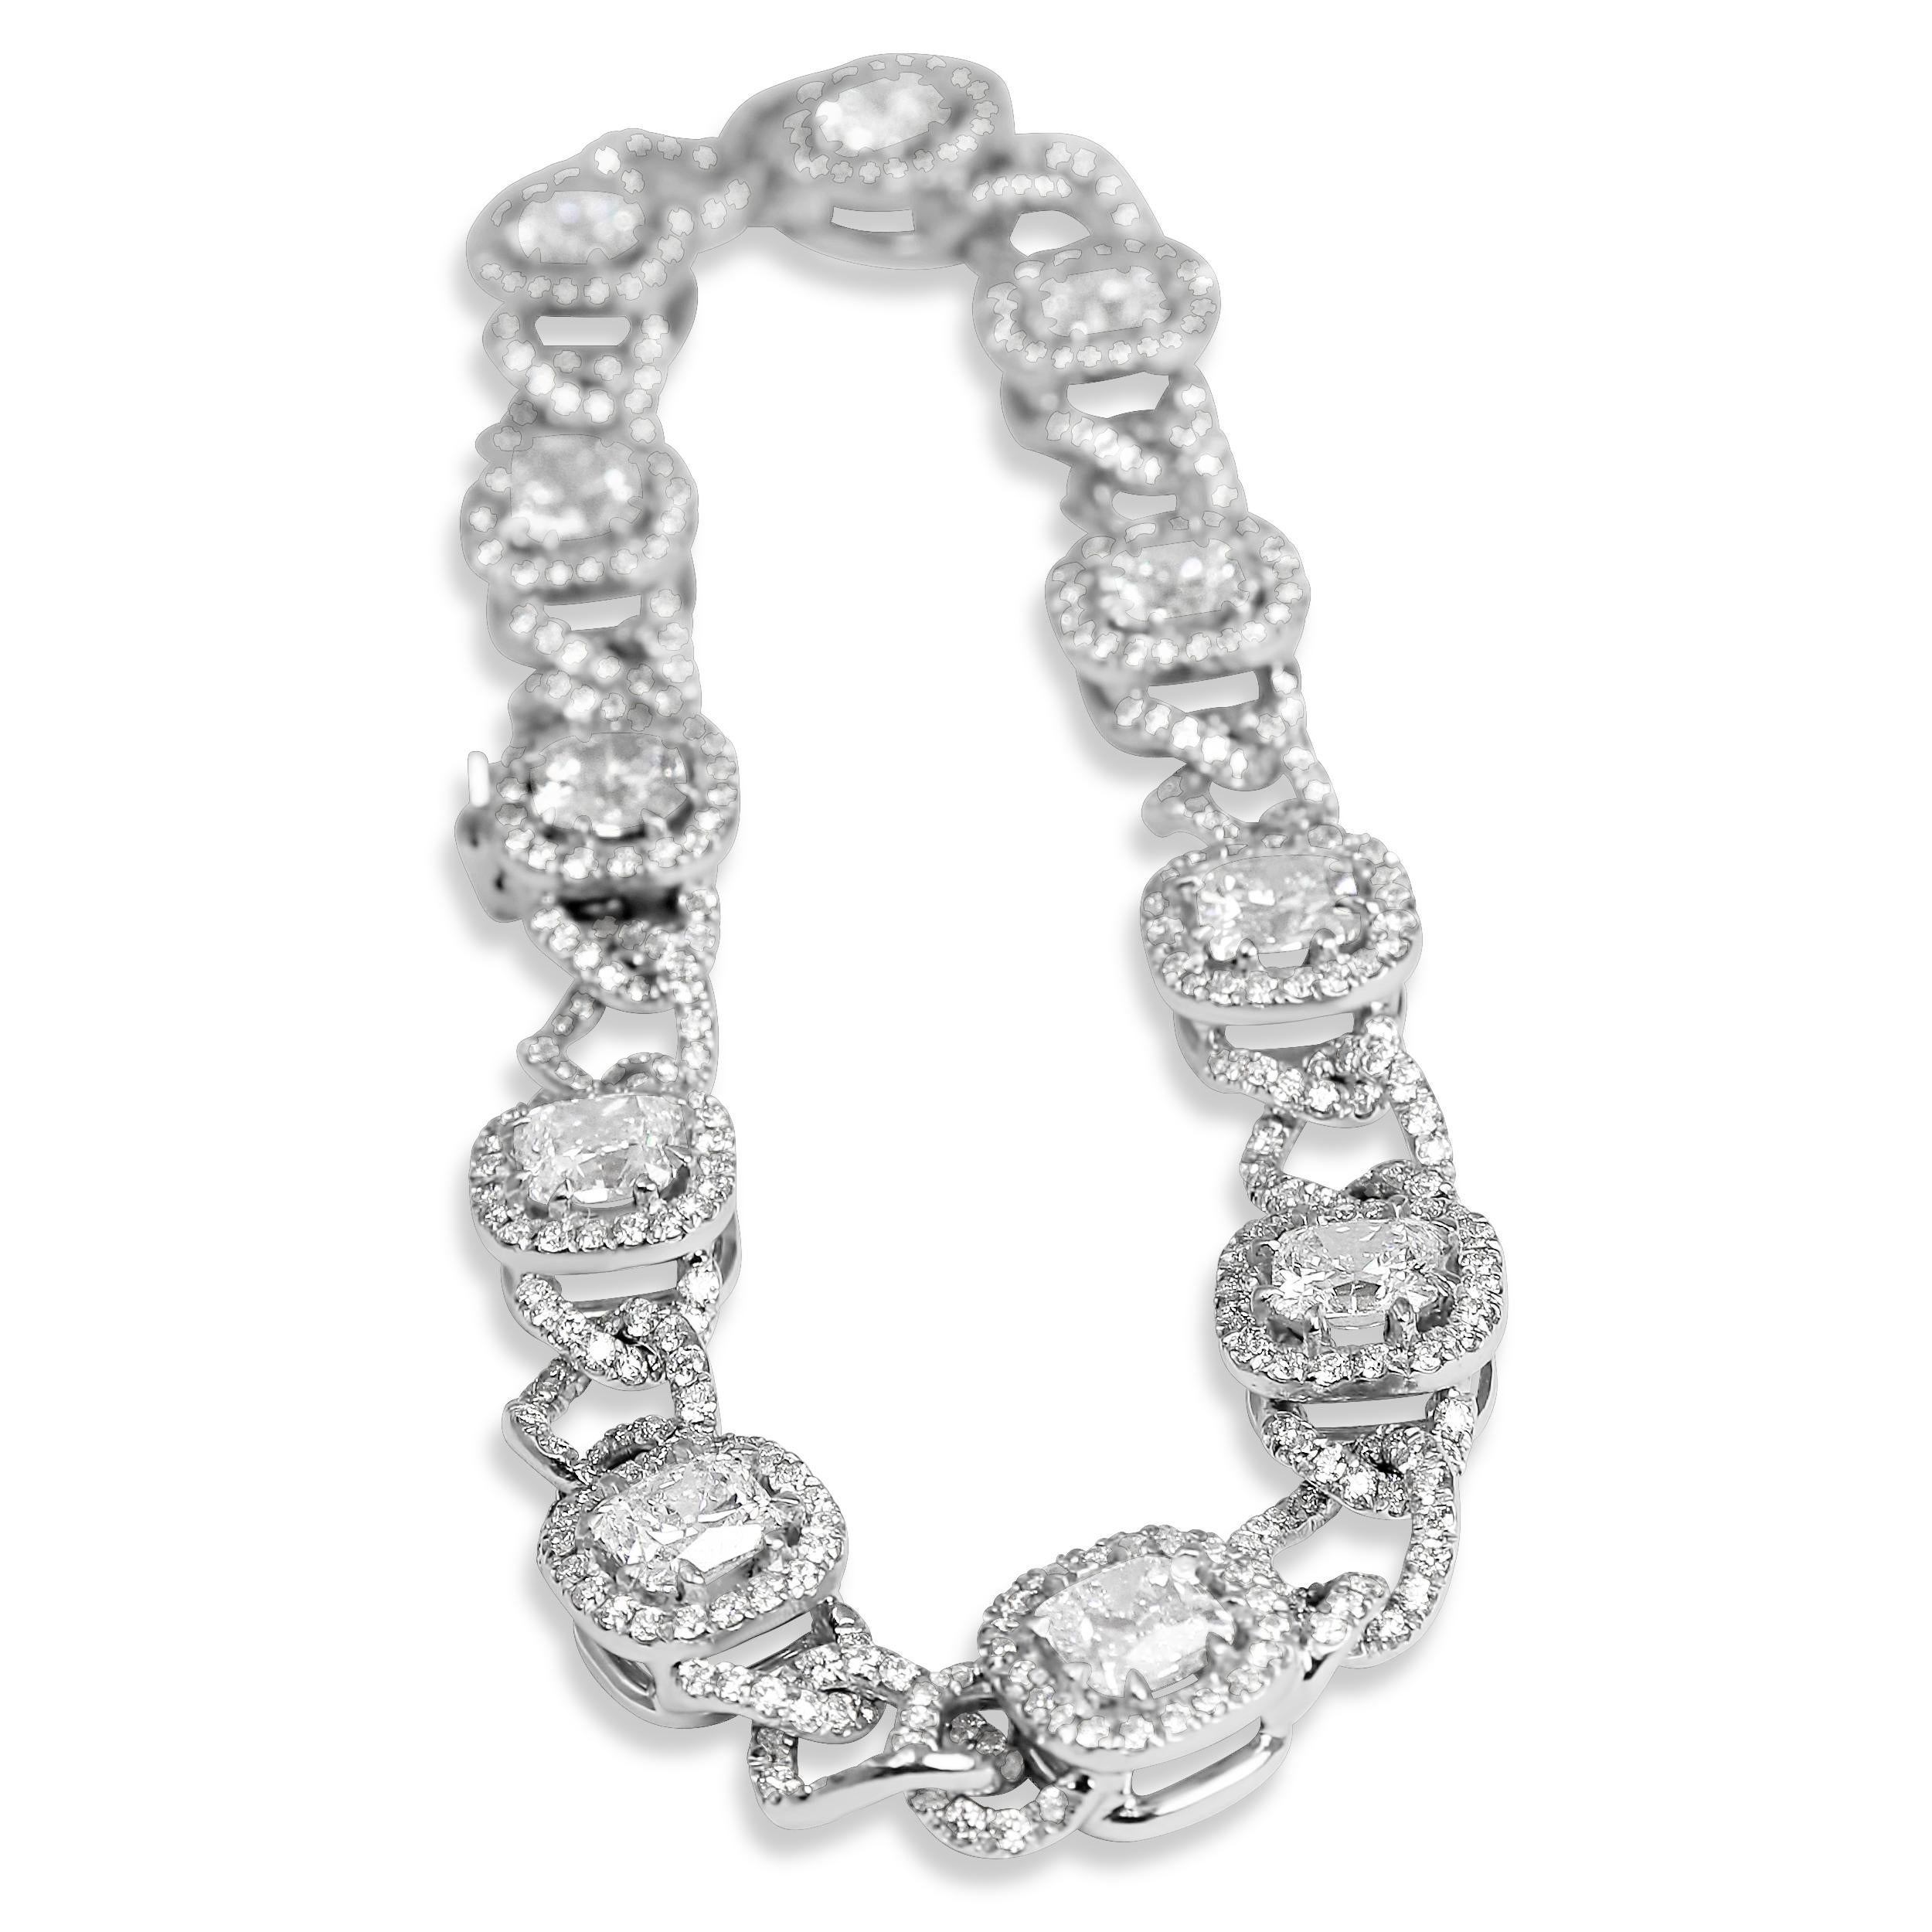 J. Birnbach 7.69 carat Diamond Pave Curb Link Bracelet with Cushion Diamonds In Excellent Condition For Sale In New York, NY